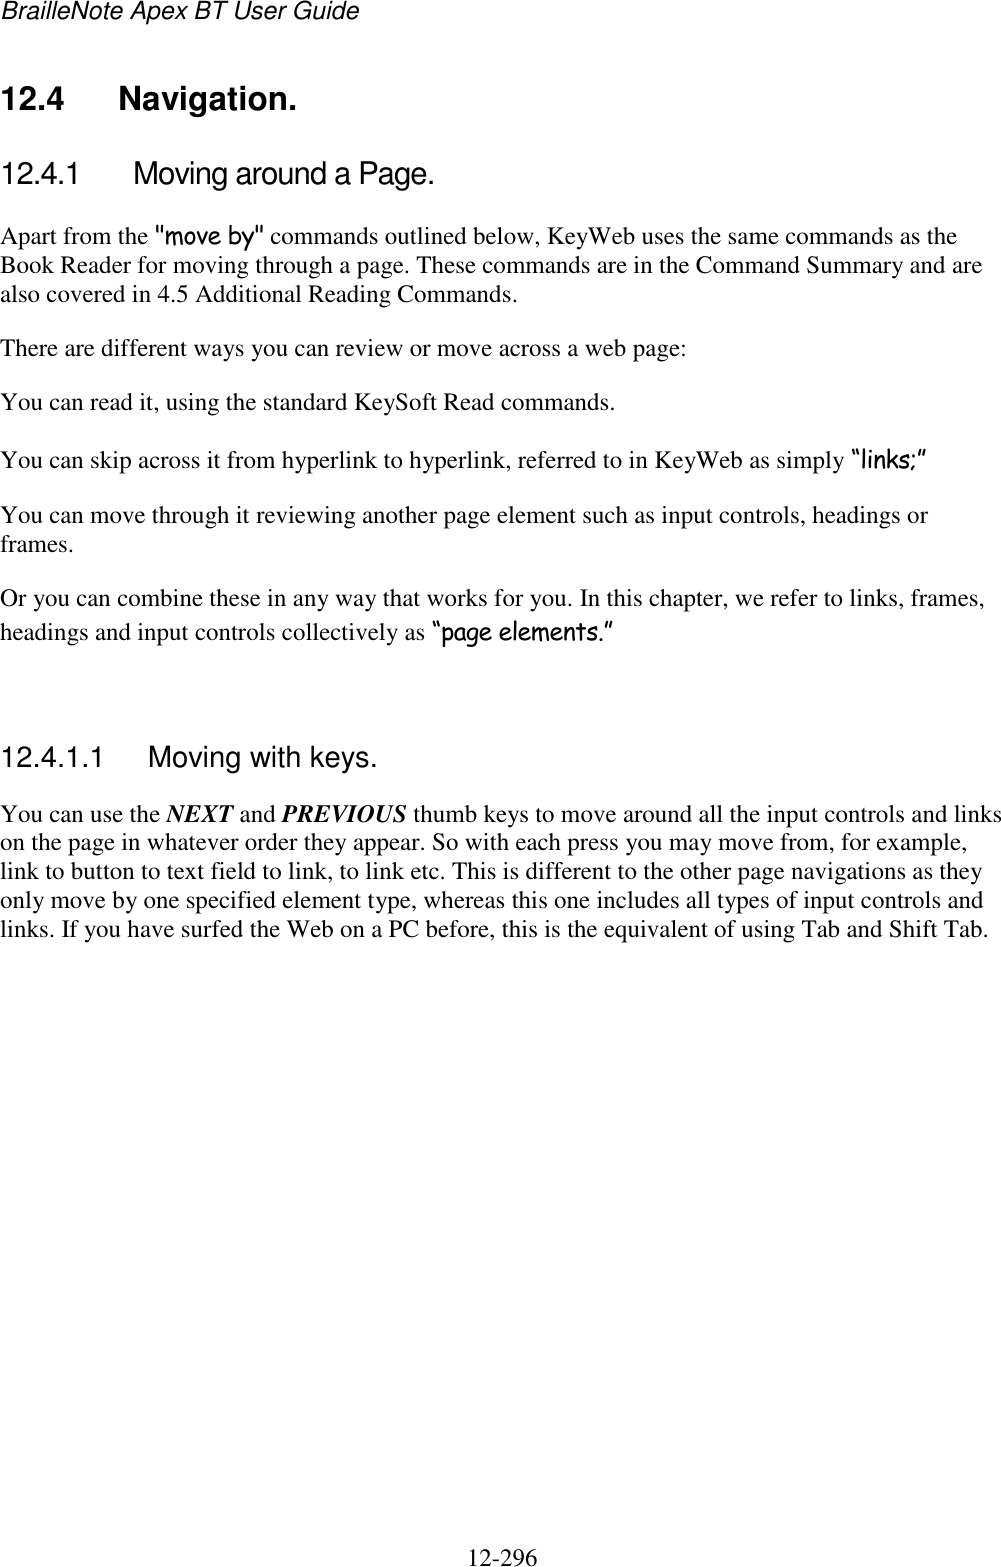 BrailleNote Apex BT User Guide   12-296   12.4  Navigation. 12.4.1  Moving around a Page. Apart from the &quot;move by&quot; commands outlined below, KeyWeb uses the same commands as the Book Reader for moving through a page. These commands are in the Command Summary and are also covered in 4.5 Additional Reading Commands. There are different ways you can review or move across a web page: You can read it, using the standard KeySoft Read commands. You can skip across it from hyperlink to hyperlink, referred to in KeyWeb as simply “links;” You can move through it reviewing another page element such as input controls, headings or frames. Or you can combine these in any way that works for you. In this chapter, we refer to links, frames, headings and input controls collectively as “page elements.”   12.4.1.1  Moving with keys. You can use the NEXT and PREVIOUS thumb keys to move around all the input controls and links on the page in whatever order they appear. So with each press you may move from, for example, link to button to text field to link, to link etc. This is different to the other page navigations as they only move by one specified element type, whereas this one includes all types of input controls and links. If you have surfed the Web on a PC before, this is the equivalent of using Tab and Shift Tab.   